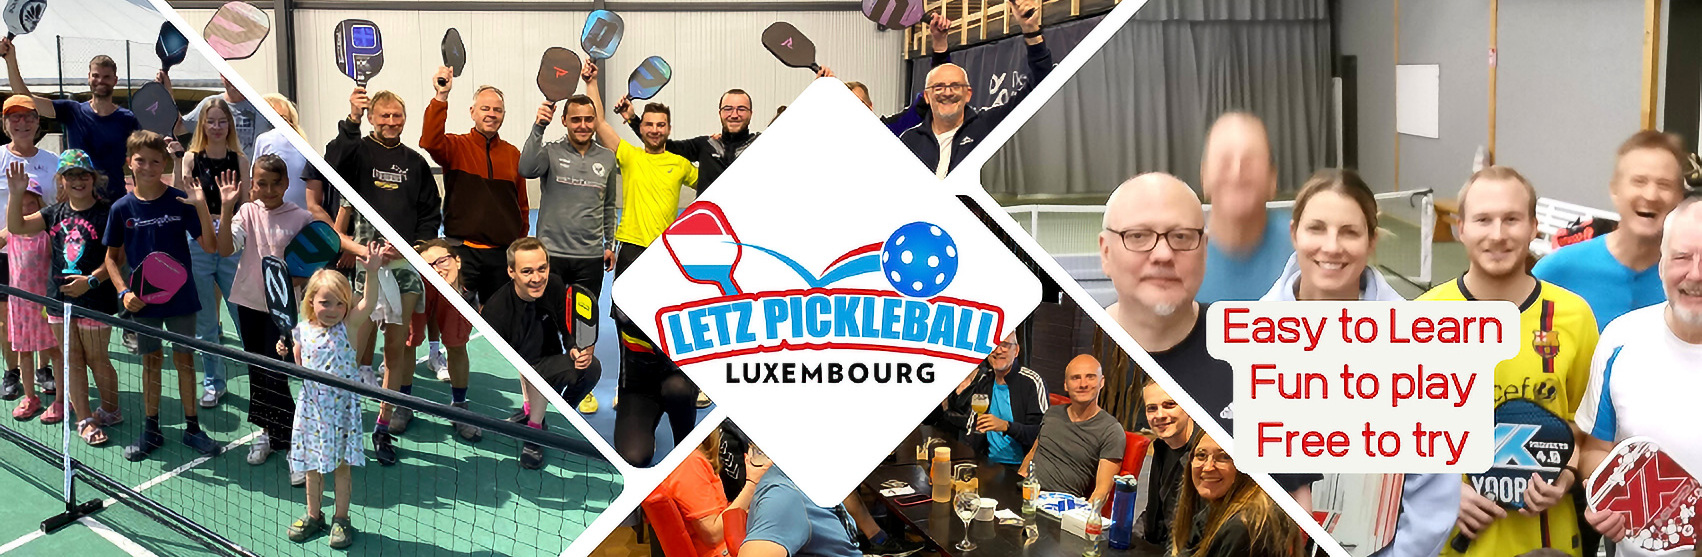 Pickleball%20luxembourg%20%281%20sur%201%29